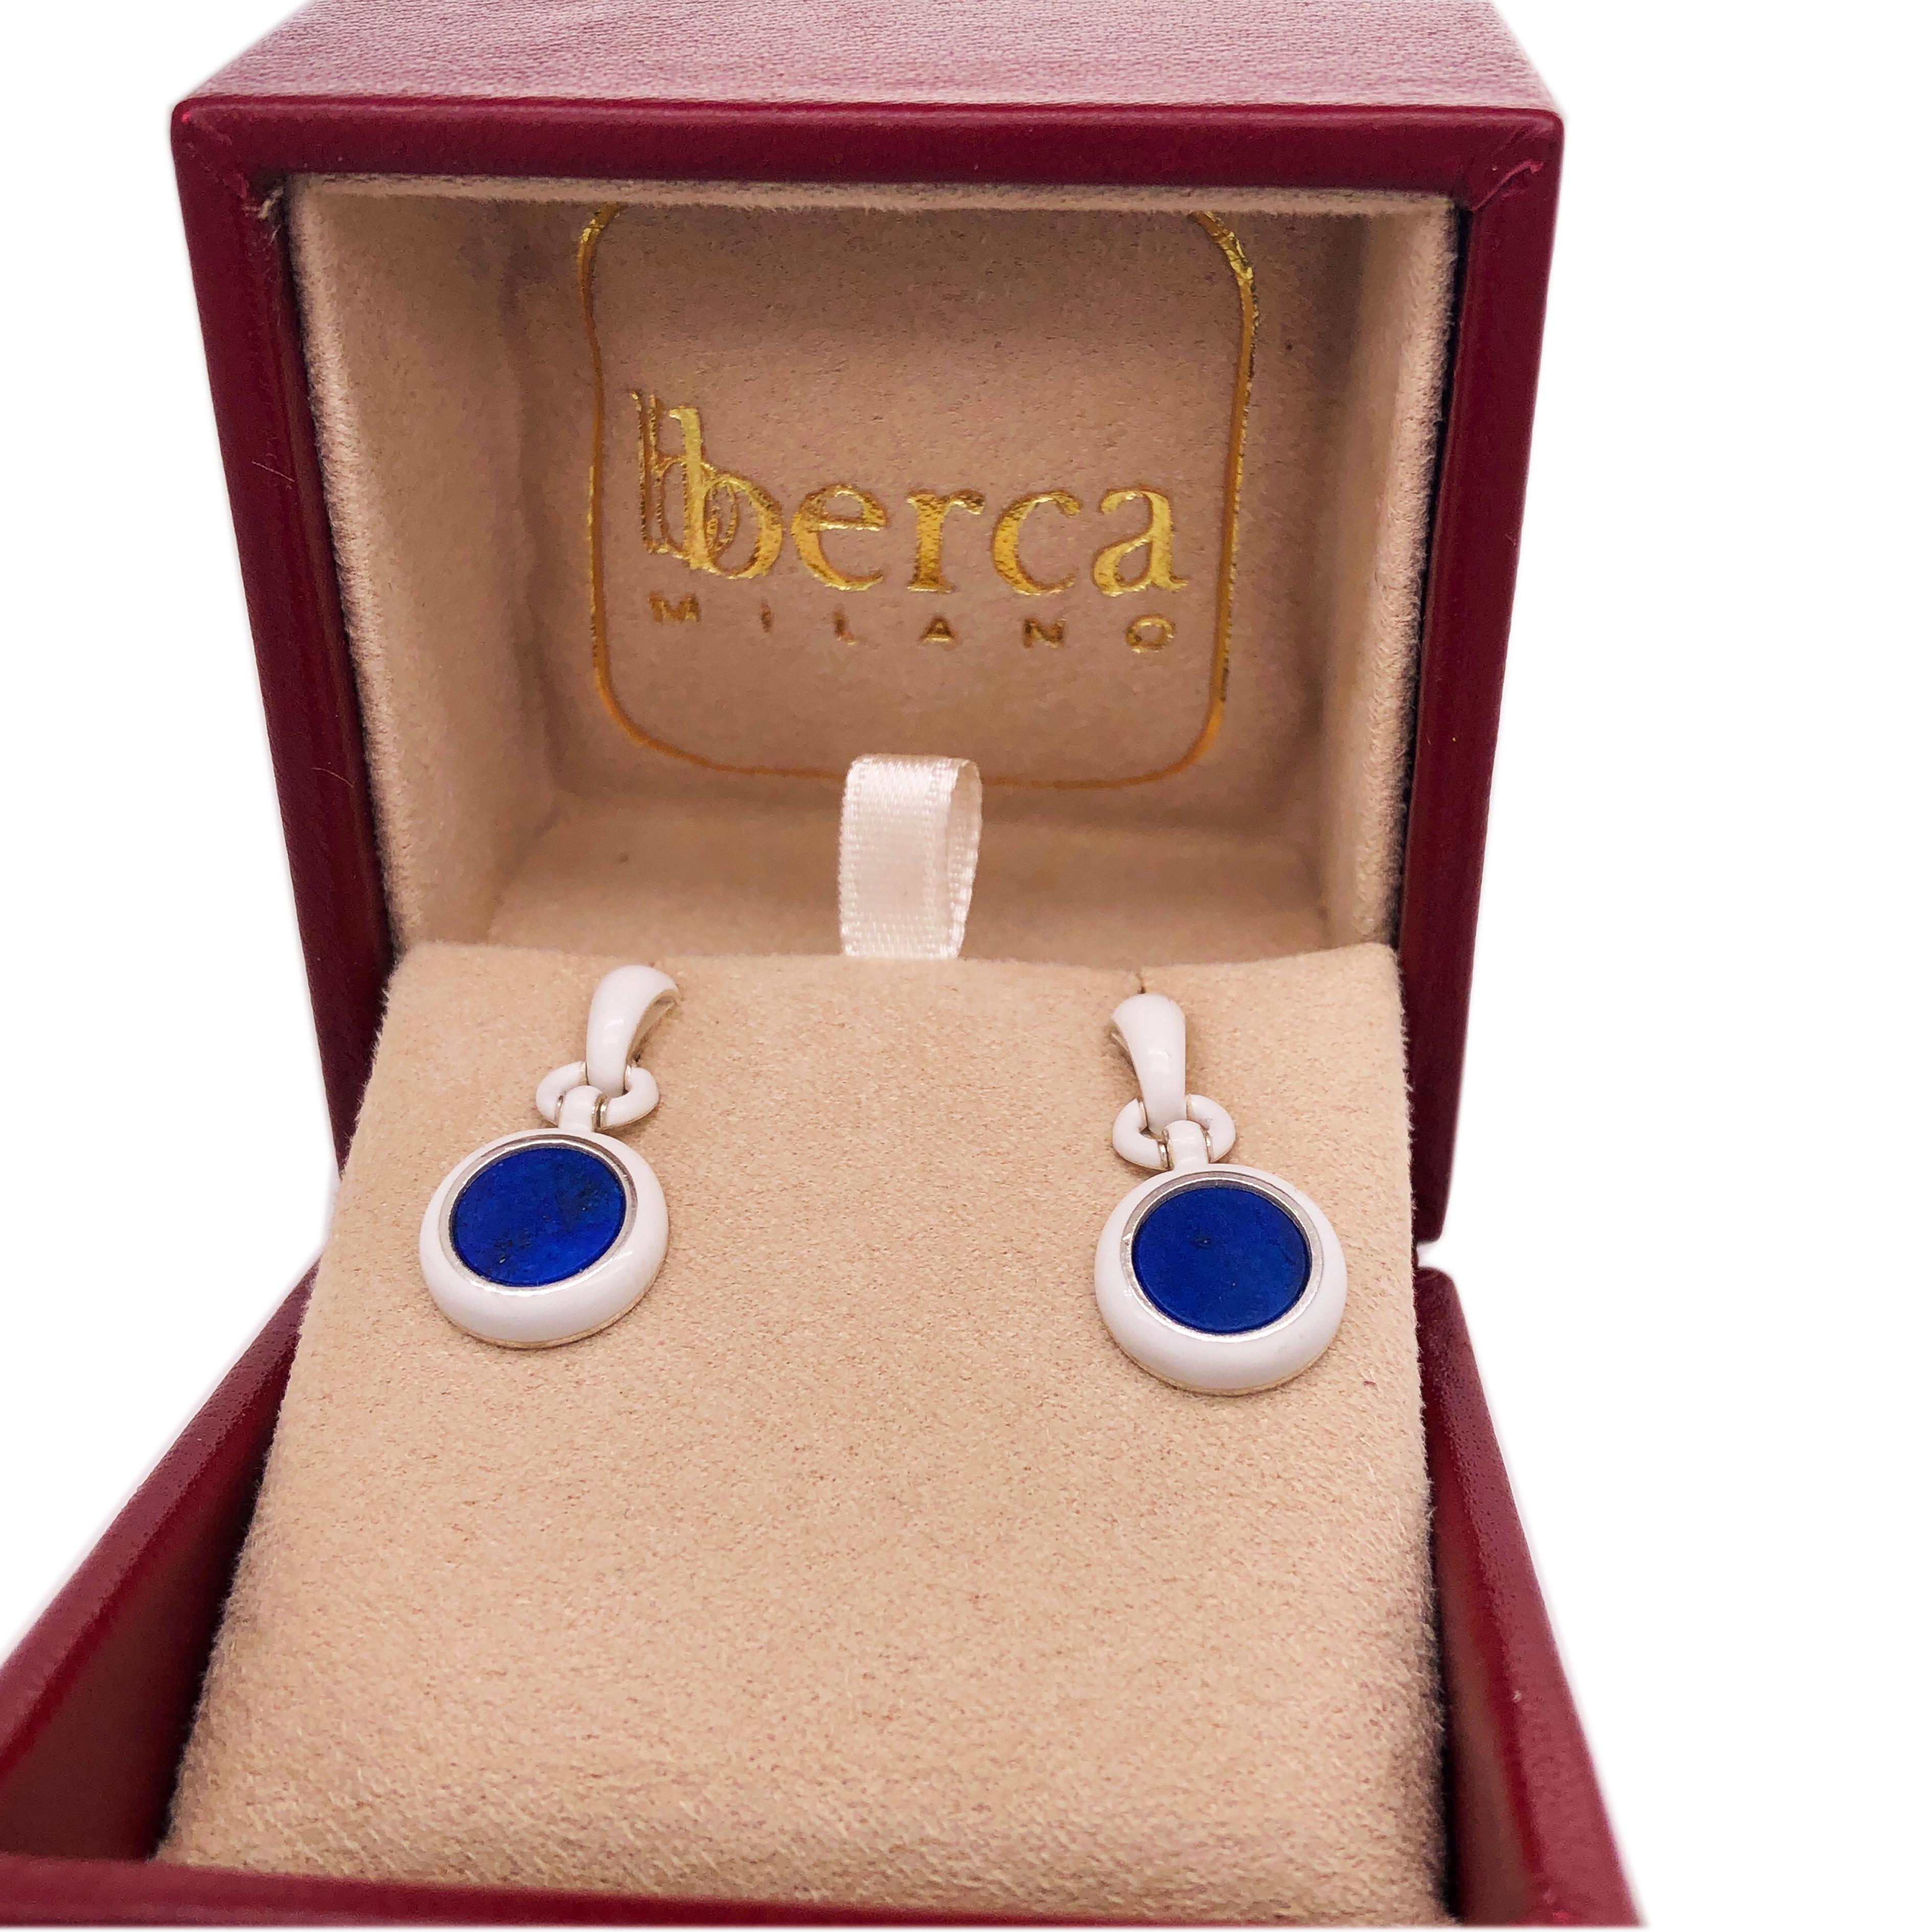 Chic yet Timeless Dangle Earrings Featuring 2.50Carat Natural Round Lapis Disk in a White Hand Enameled Sterling Silver Setting.
In our Precious Handcrafted tobacco suede Leather Box and pouch.


Total Lenght 1.34 inches